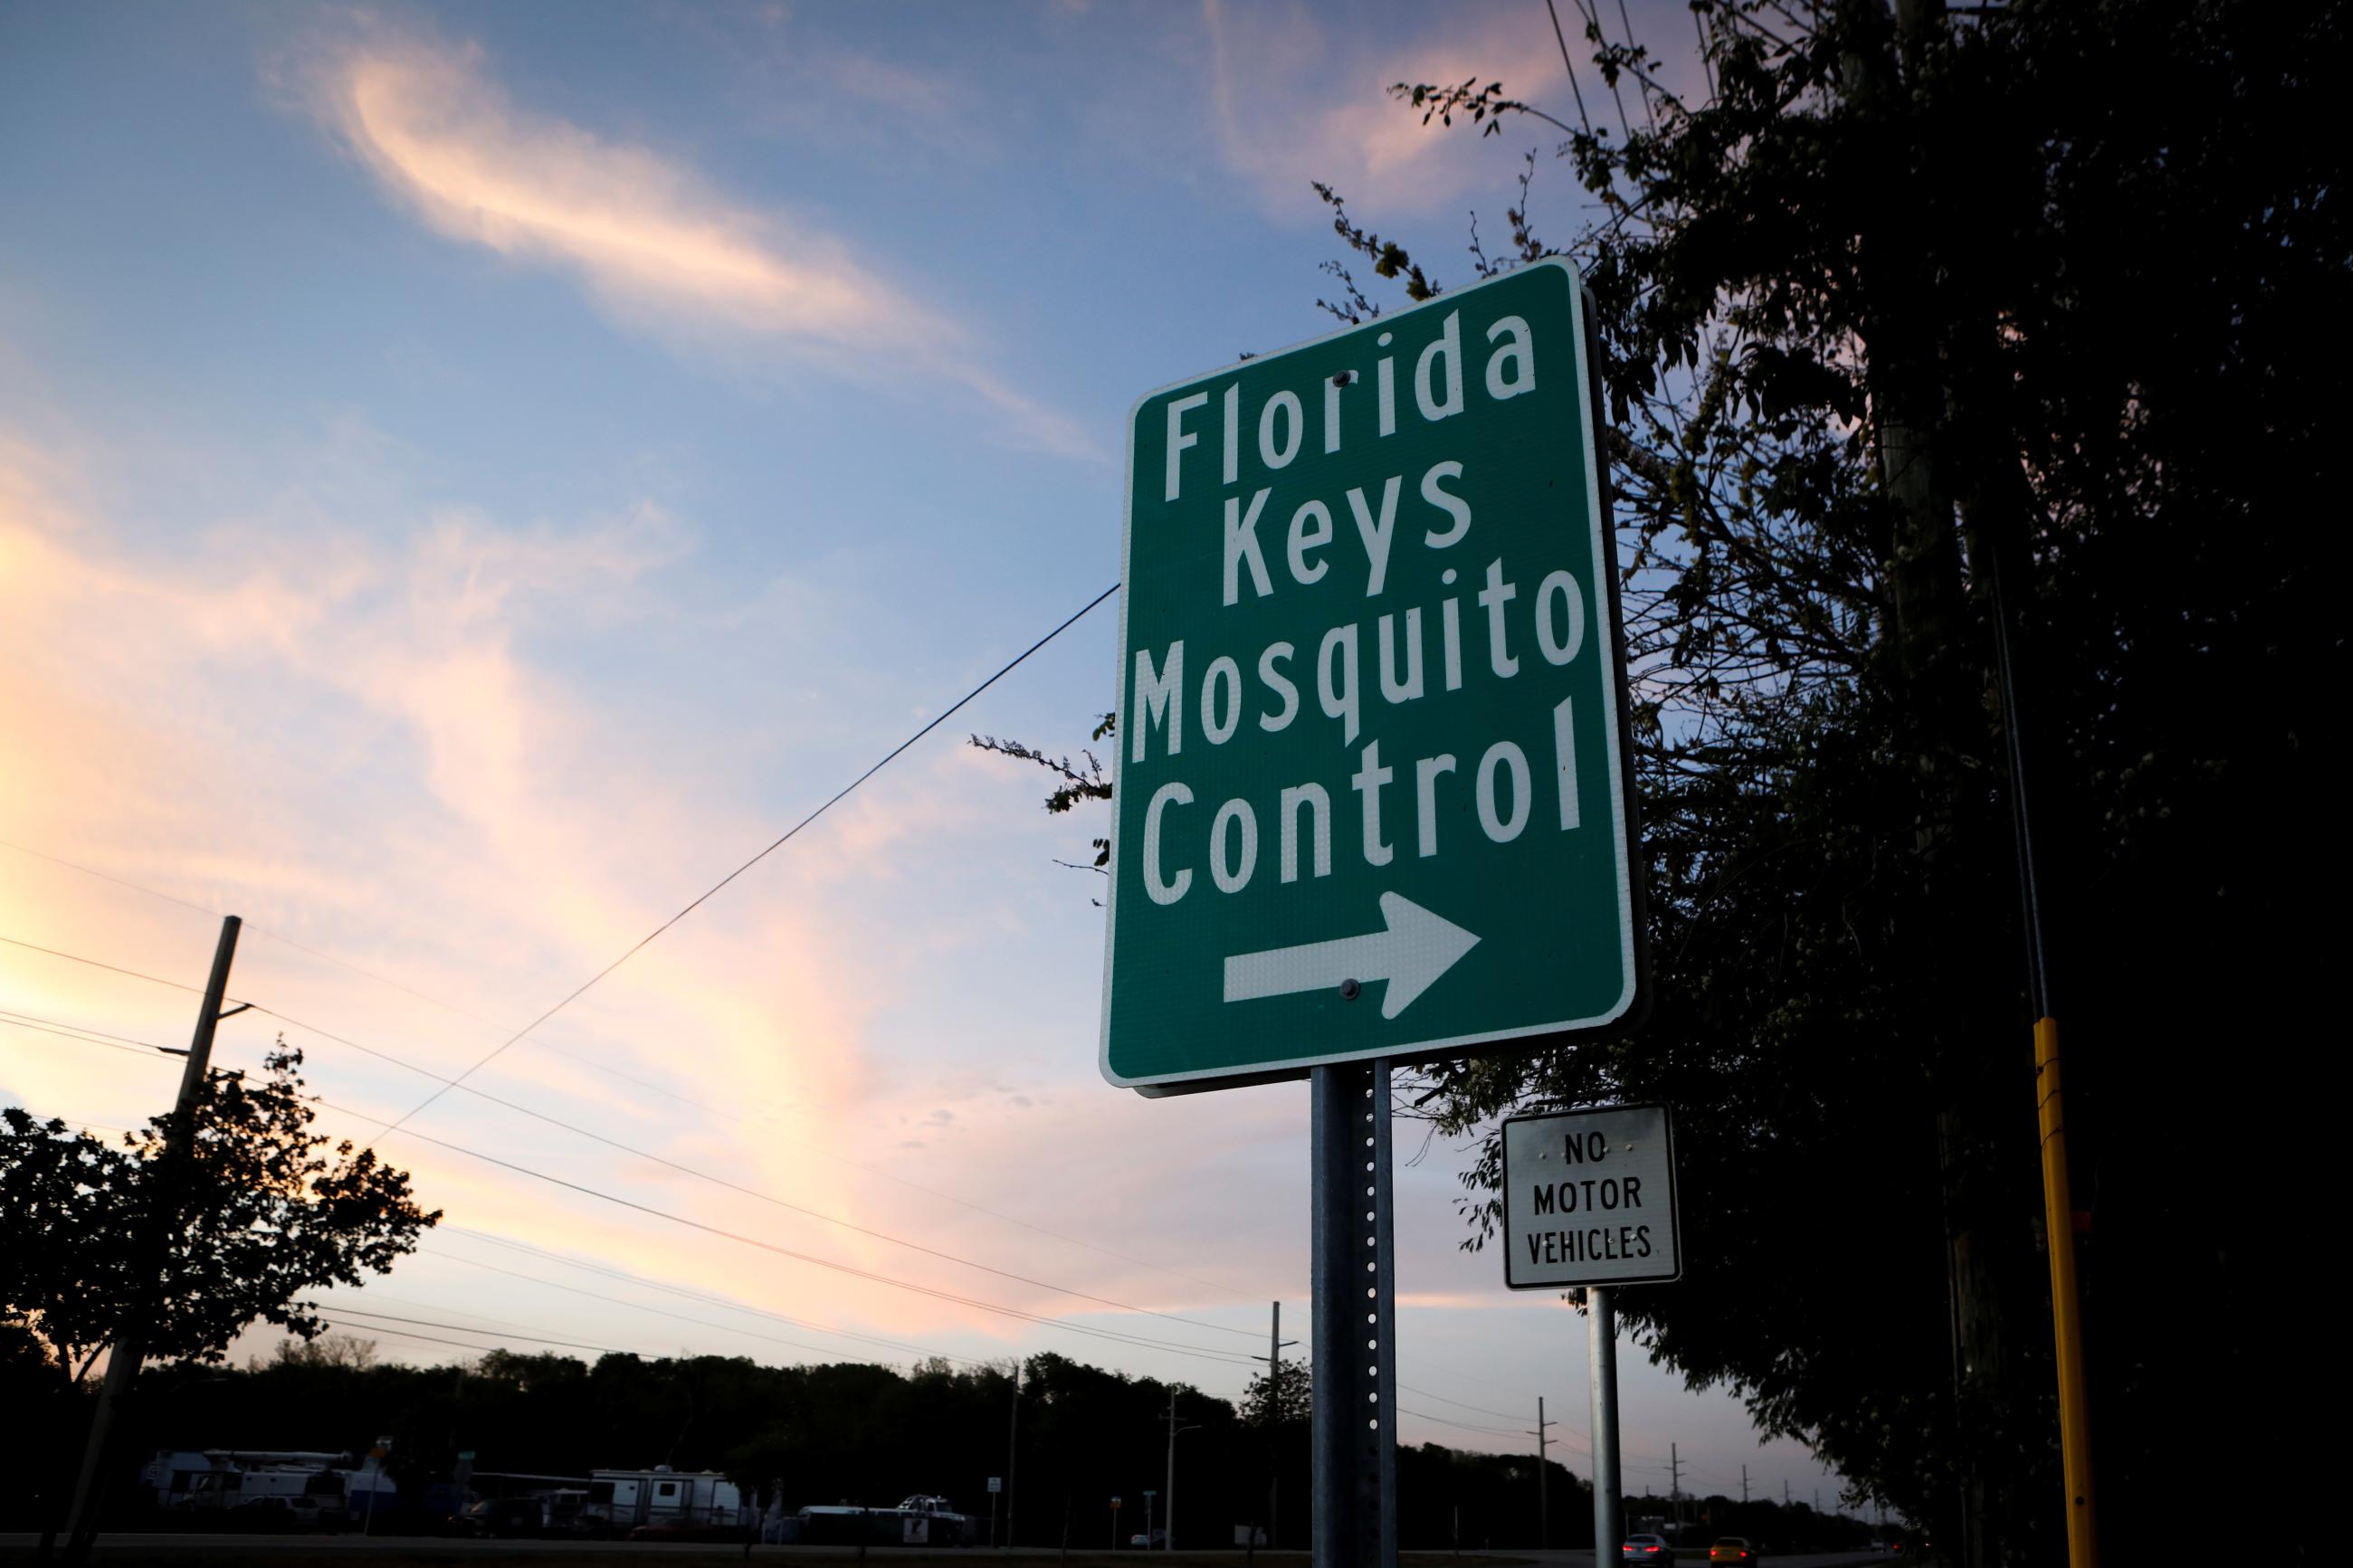 A sign is seen outside a Florida Keys Mosquito Control District branch that reads "Florida Keys Mosquito Control"